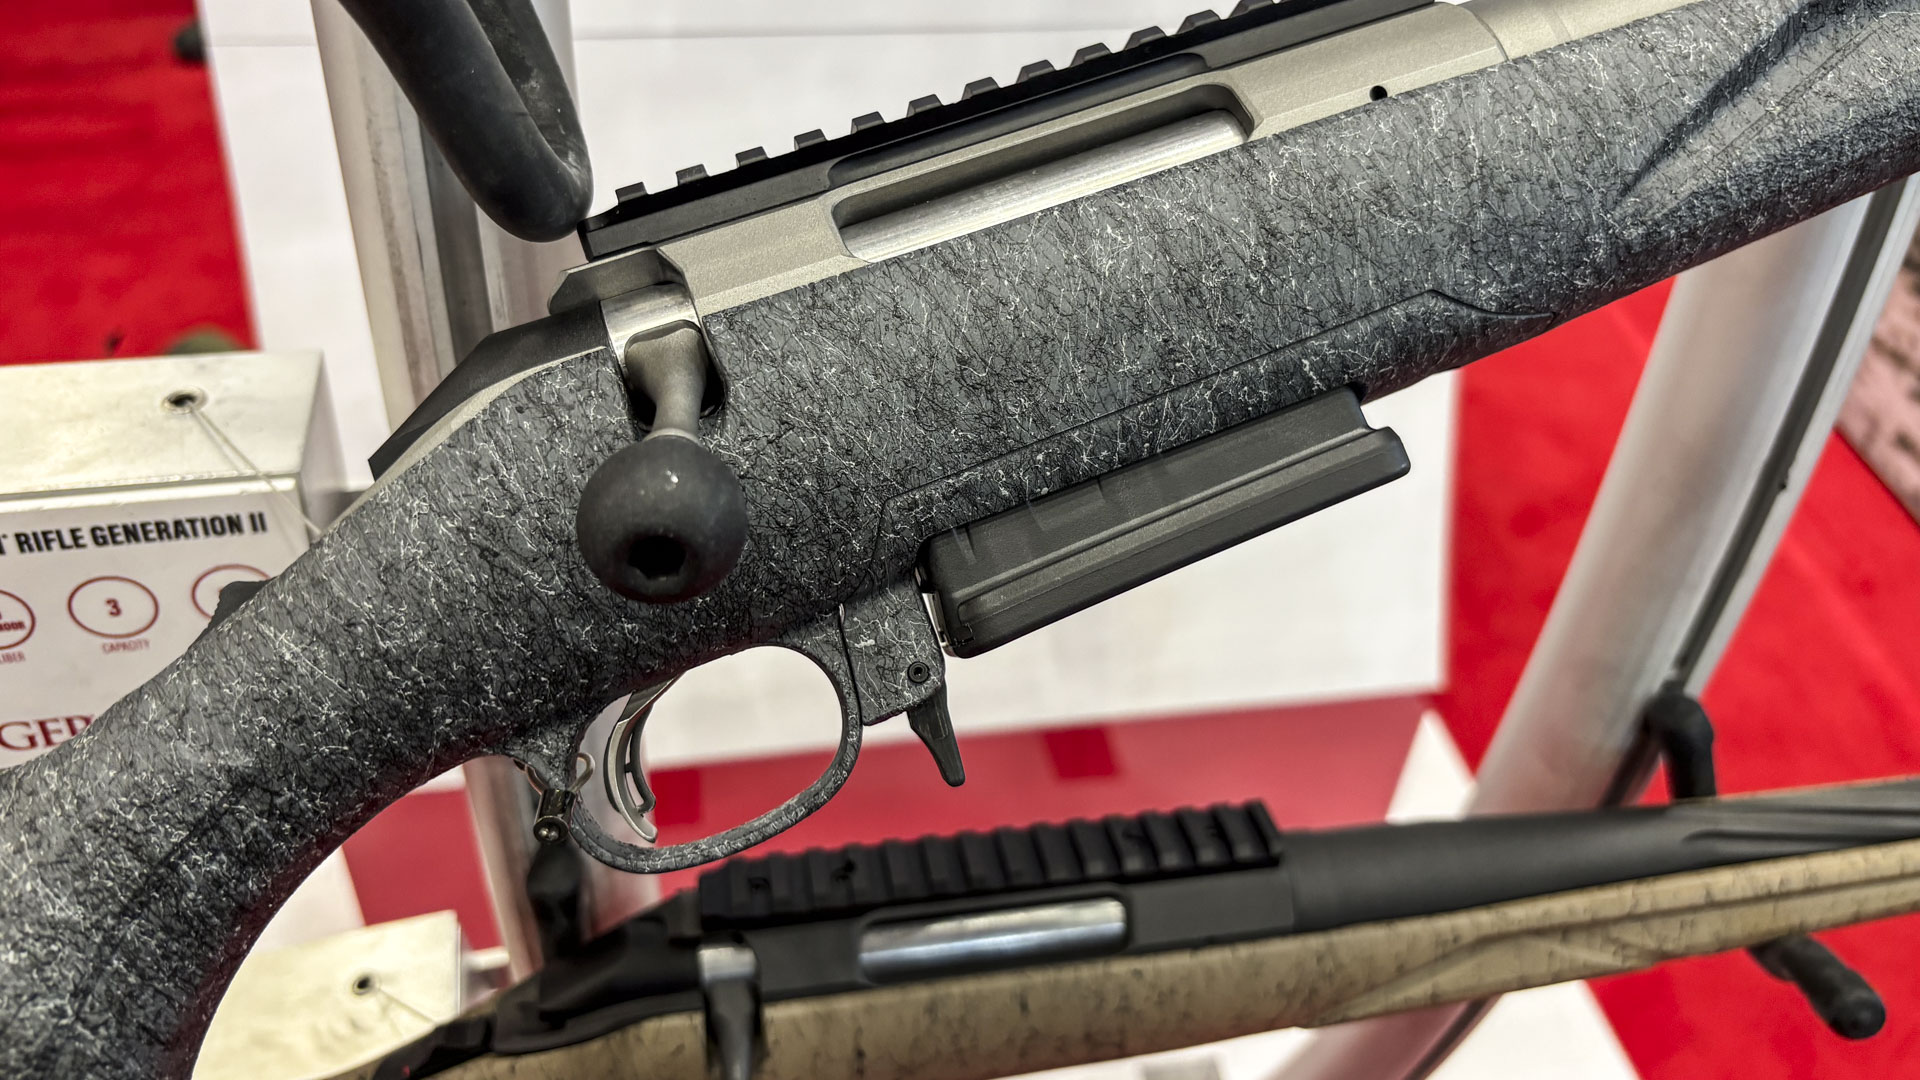 Ruger American Rifle generation II